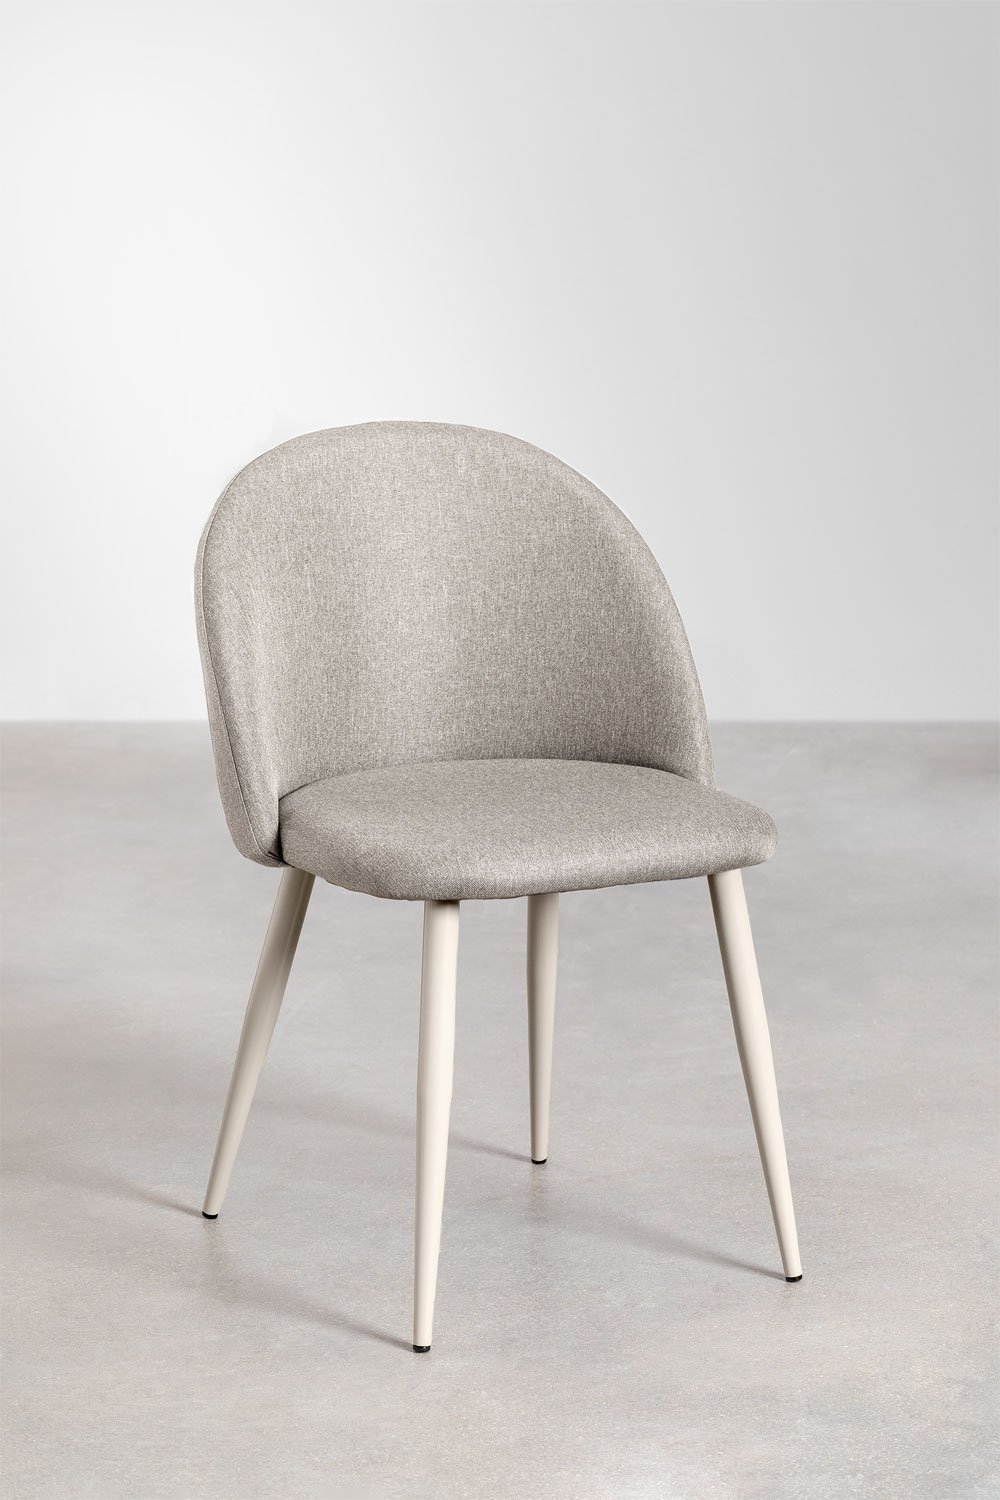 Kana Deluxe Dining Chair, gallery image 1